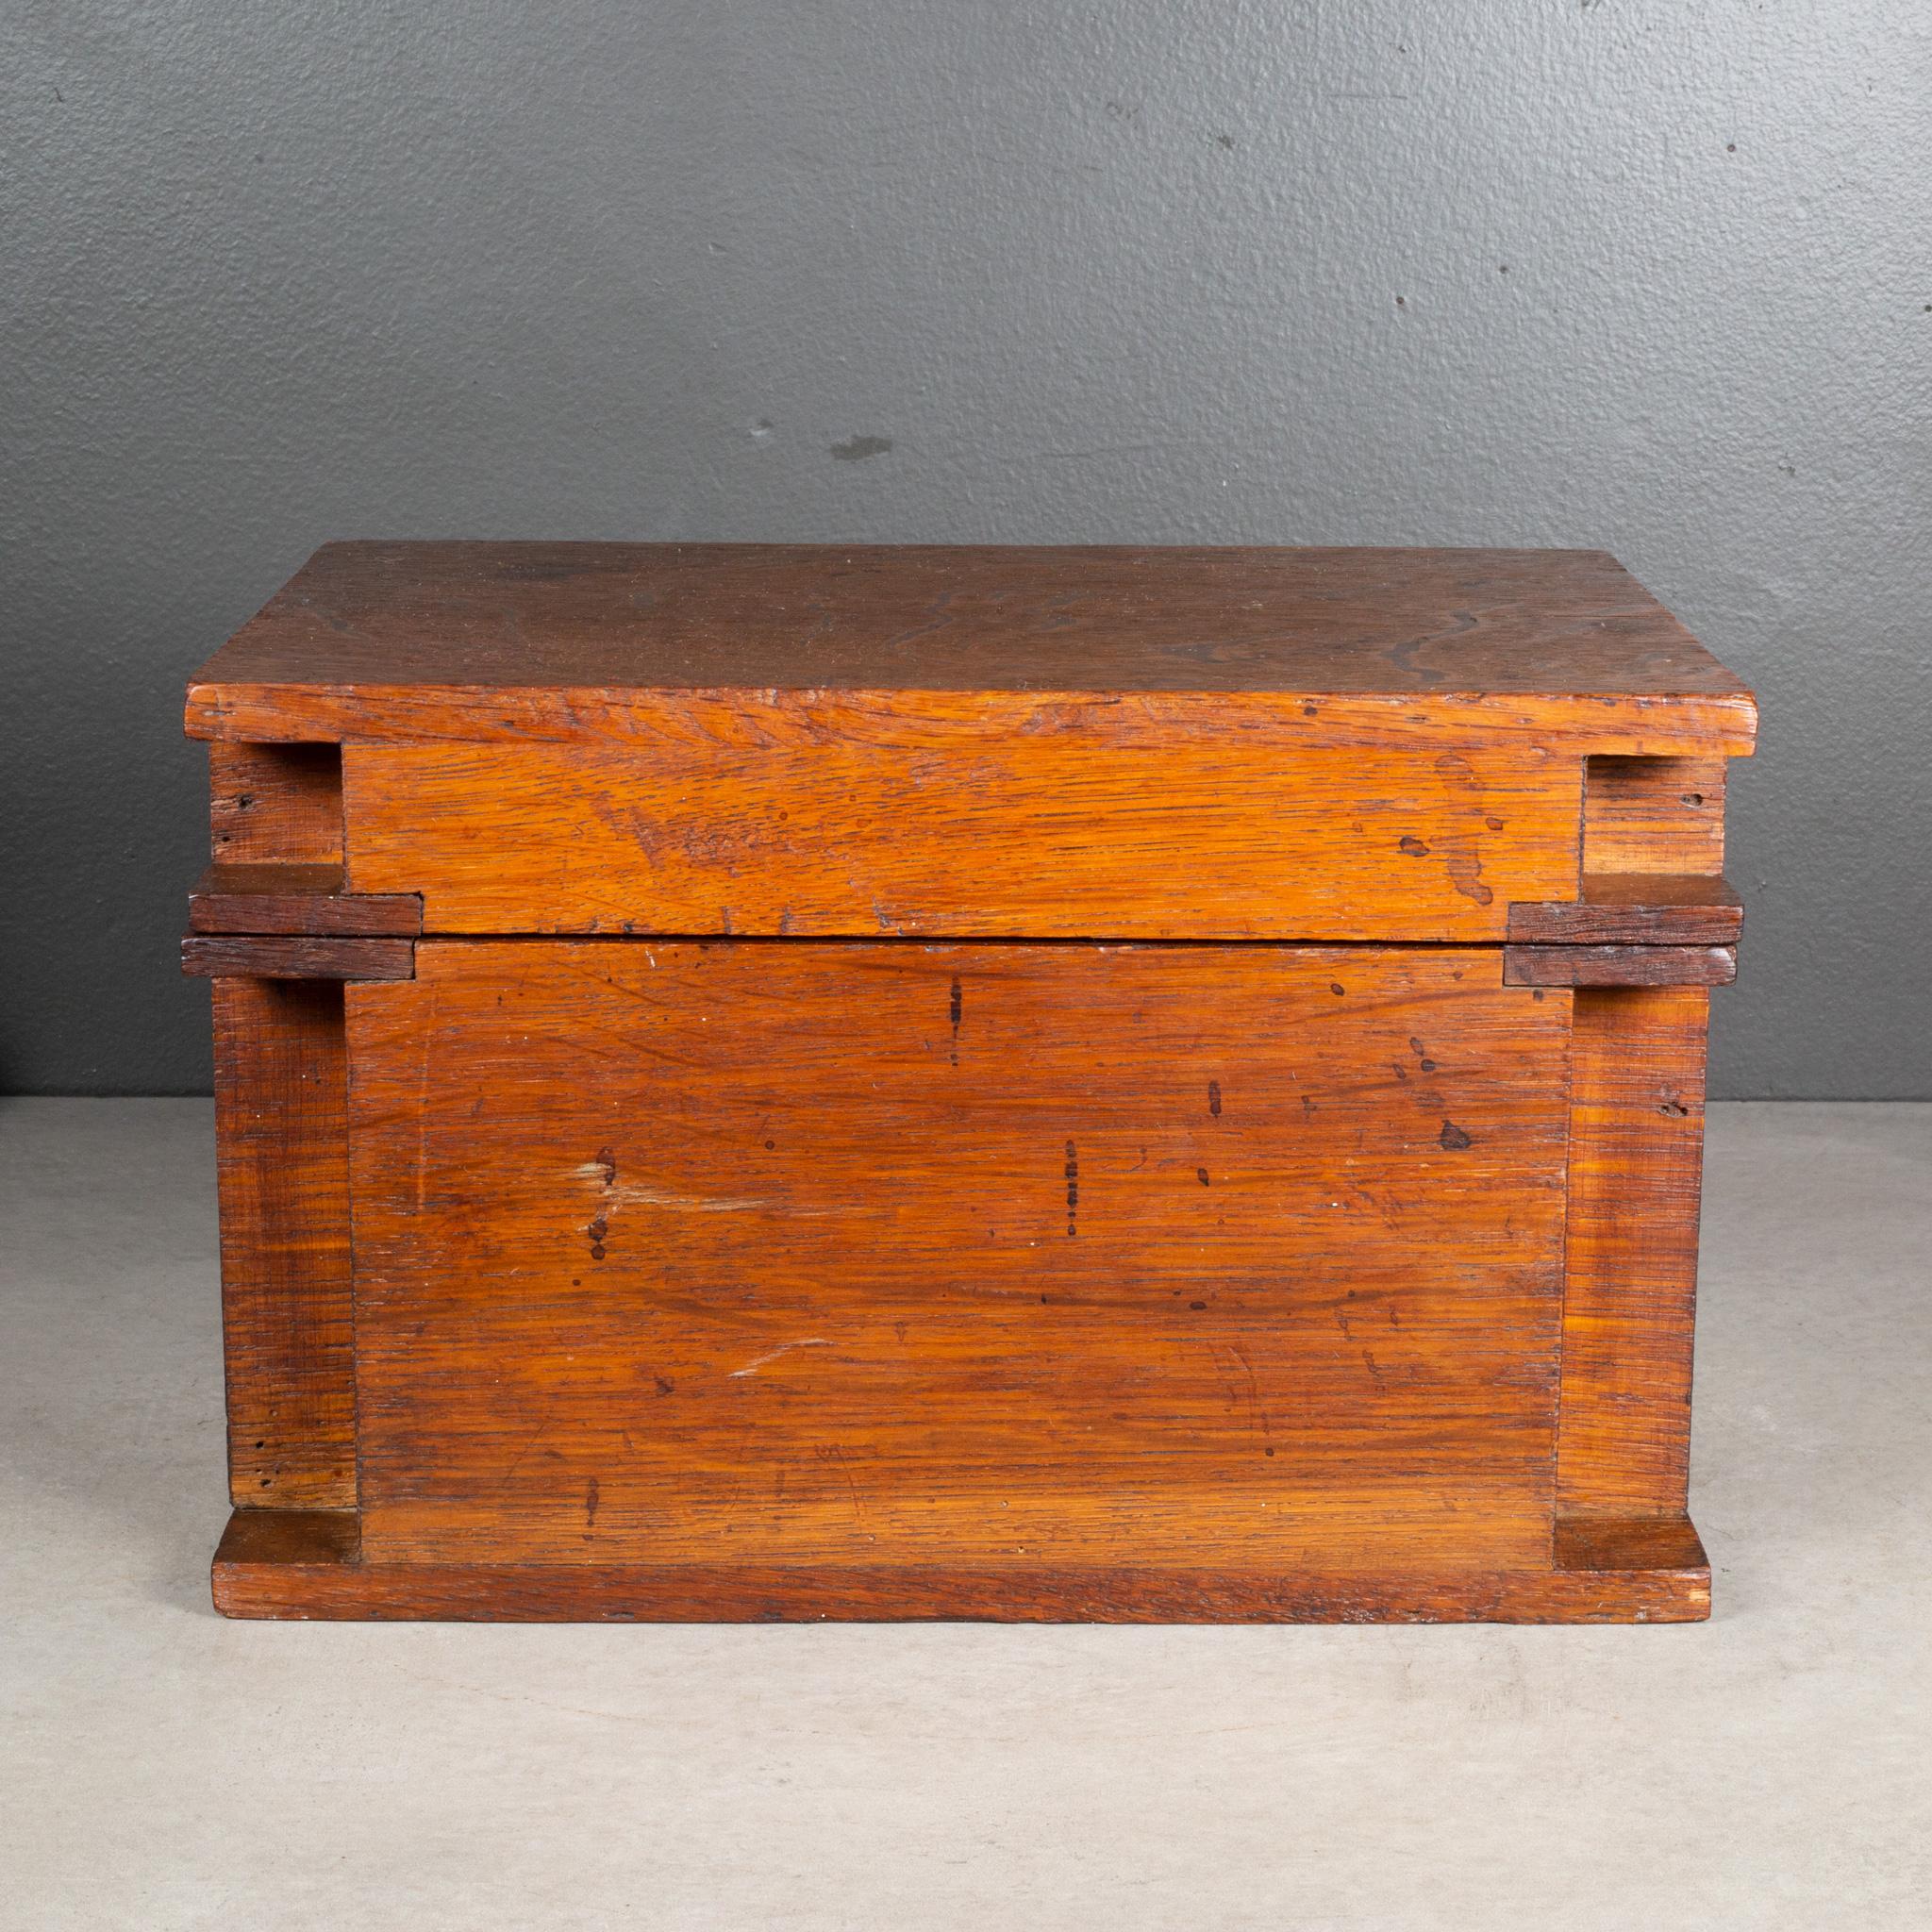 19th Century Handmade Wooden Box with Inner Tray and Secret Drawer c.1880-1920 For Sale